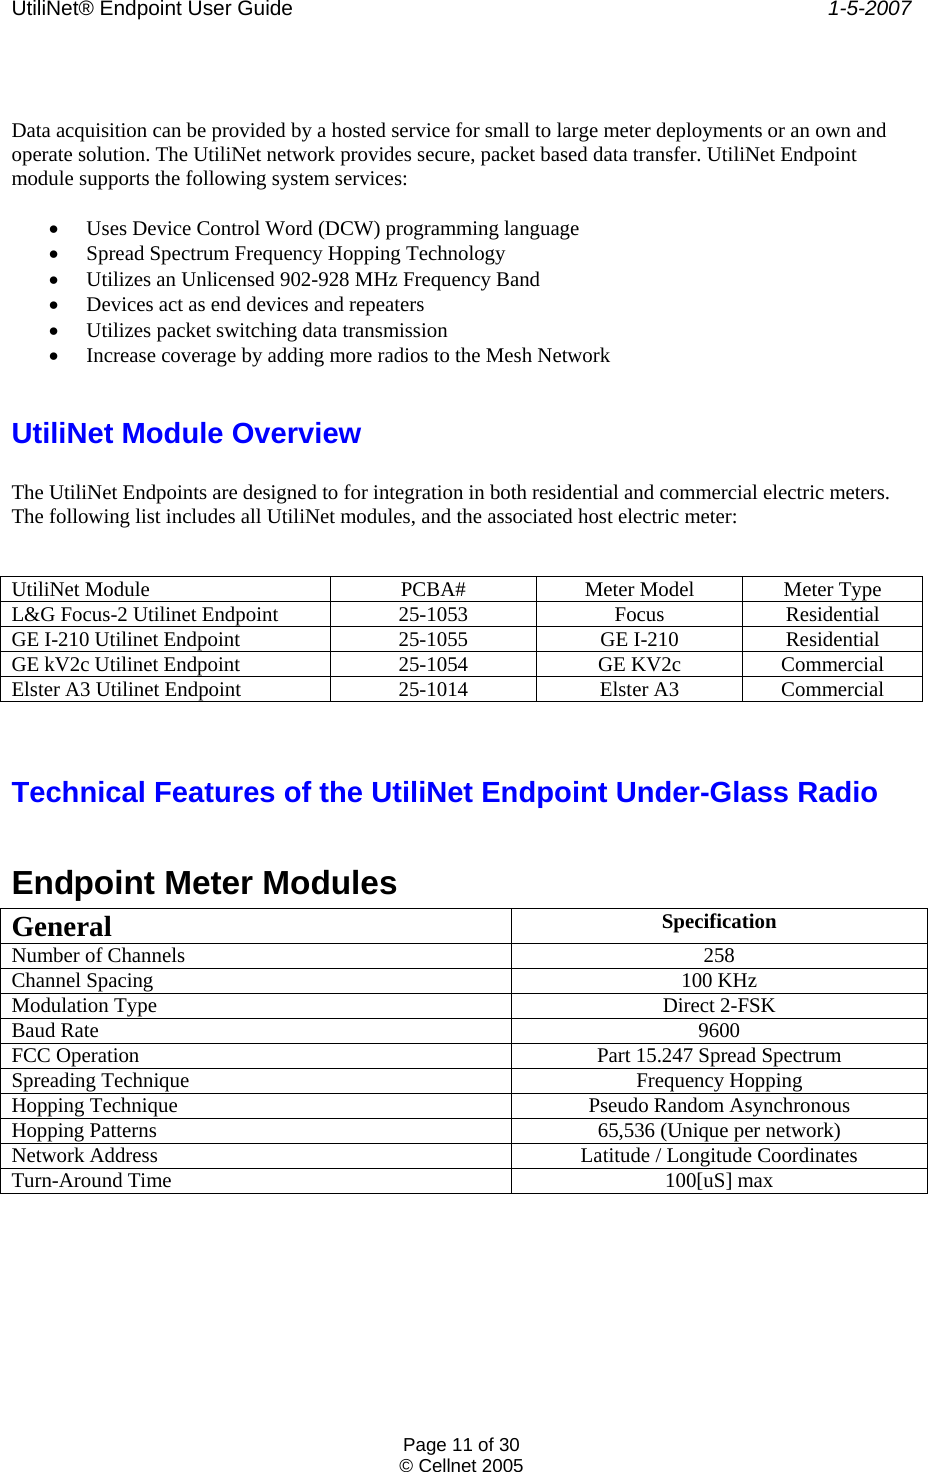 UtiliNet® Endpoint User Guide    1-5-2007 Page 11 of 30 © Cellnet 2005    Data acquisition can be provided by a hosted service for small to large meter deployments or an own and operate solution. The UtiliNet network provides secure, packet based data transfer. UtiliNet Endpoint module supports the following system services:  • Uses Device Control Word (DCW) programming language • Spread Spectrum Frequency Hopping Technology • Utilizes an Unlicensed 902-928 MHz Frequency Band • Devices act as end devices and repeaters • Utilizes packet switching data transmission • Increase coverage by adding more radios to the Mesh Network  UtiliNet Module Overview  The UtiliNet Endpoints are designed to for integration in both residential and commercial electric meters. The following list includes all UtiliNet modules, and the associated host electric meter:    UtiliNet Module PCBA# Meter Model Meter Type L&amp;G Focus-2 Utilinet Endpoint 25-1053 Focus Residential GE I-210 Utilinet Endpoint 25-1055 GE I-210 Residential GE kV2c Utilinet Endpoint 25-1054 GE KV2c Commercial Elster A3 Utilinet Endpoint 25-1014 Elster A3 Commercial   Technical Features of the UtiliNet Endpoint Under-Glass Radio  Endpoint Meter Modules General  Specification Number of Channels  258 Channel Spacing  100 KHz Modulation Type  Direct 2-FSK Baud Rate  9600 FCC Operation  Part 15.247 Spread Spectrum Spreading Technique  Frequency Hopping Hopping Technique  Pseudo Random Asynchronous Hopping Patterns  65,536 (Unique per network) Network Address  Latitude / Longitude Coordinates Turn-Around Time  100[uS] max 